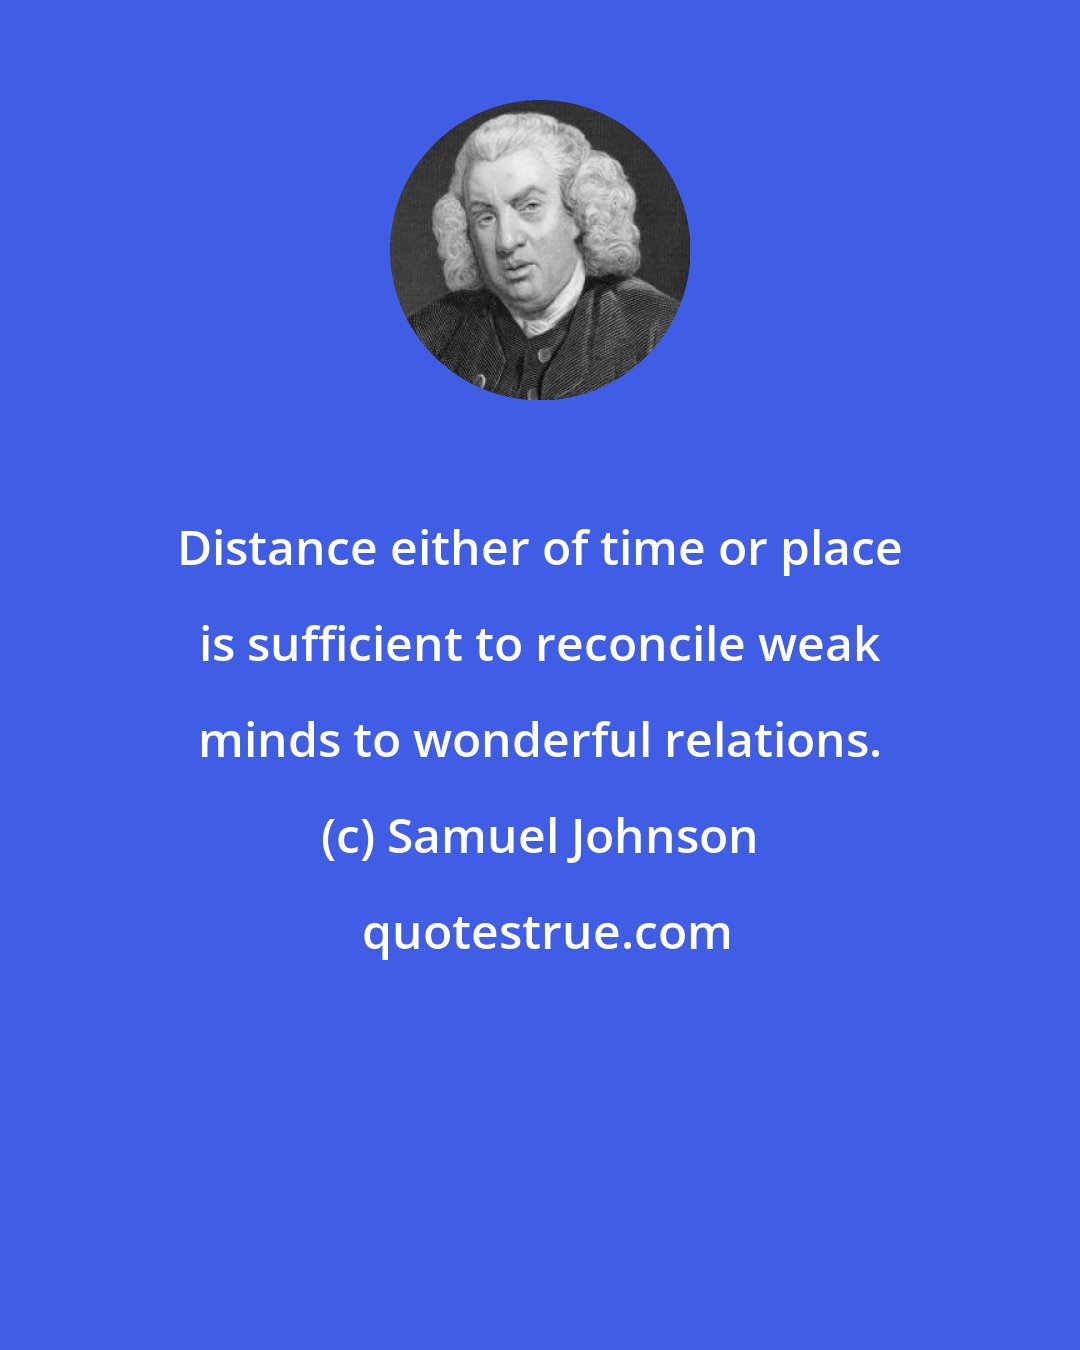 Samuel Johnson: Distance either of time or place is sufficient to reconcile weak minds to wonderful relations.